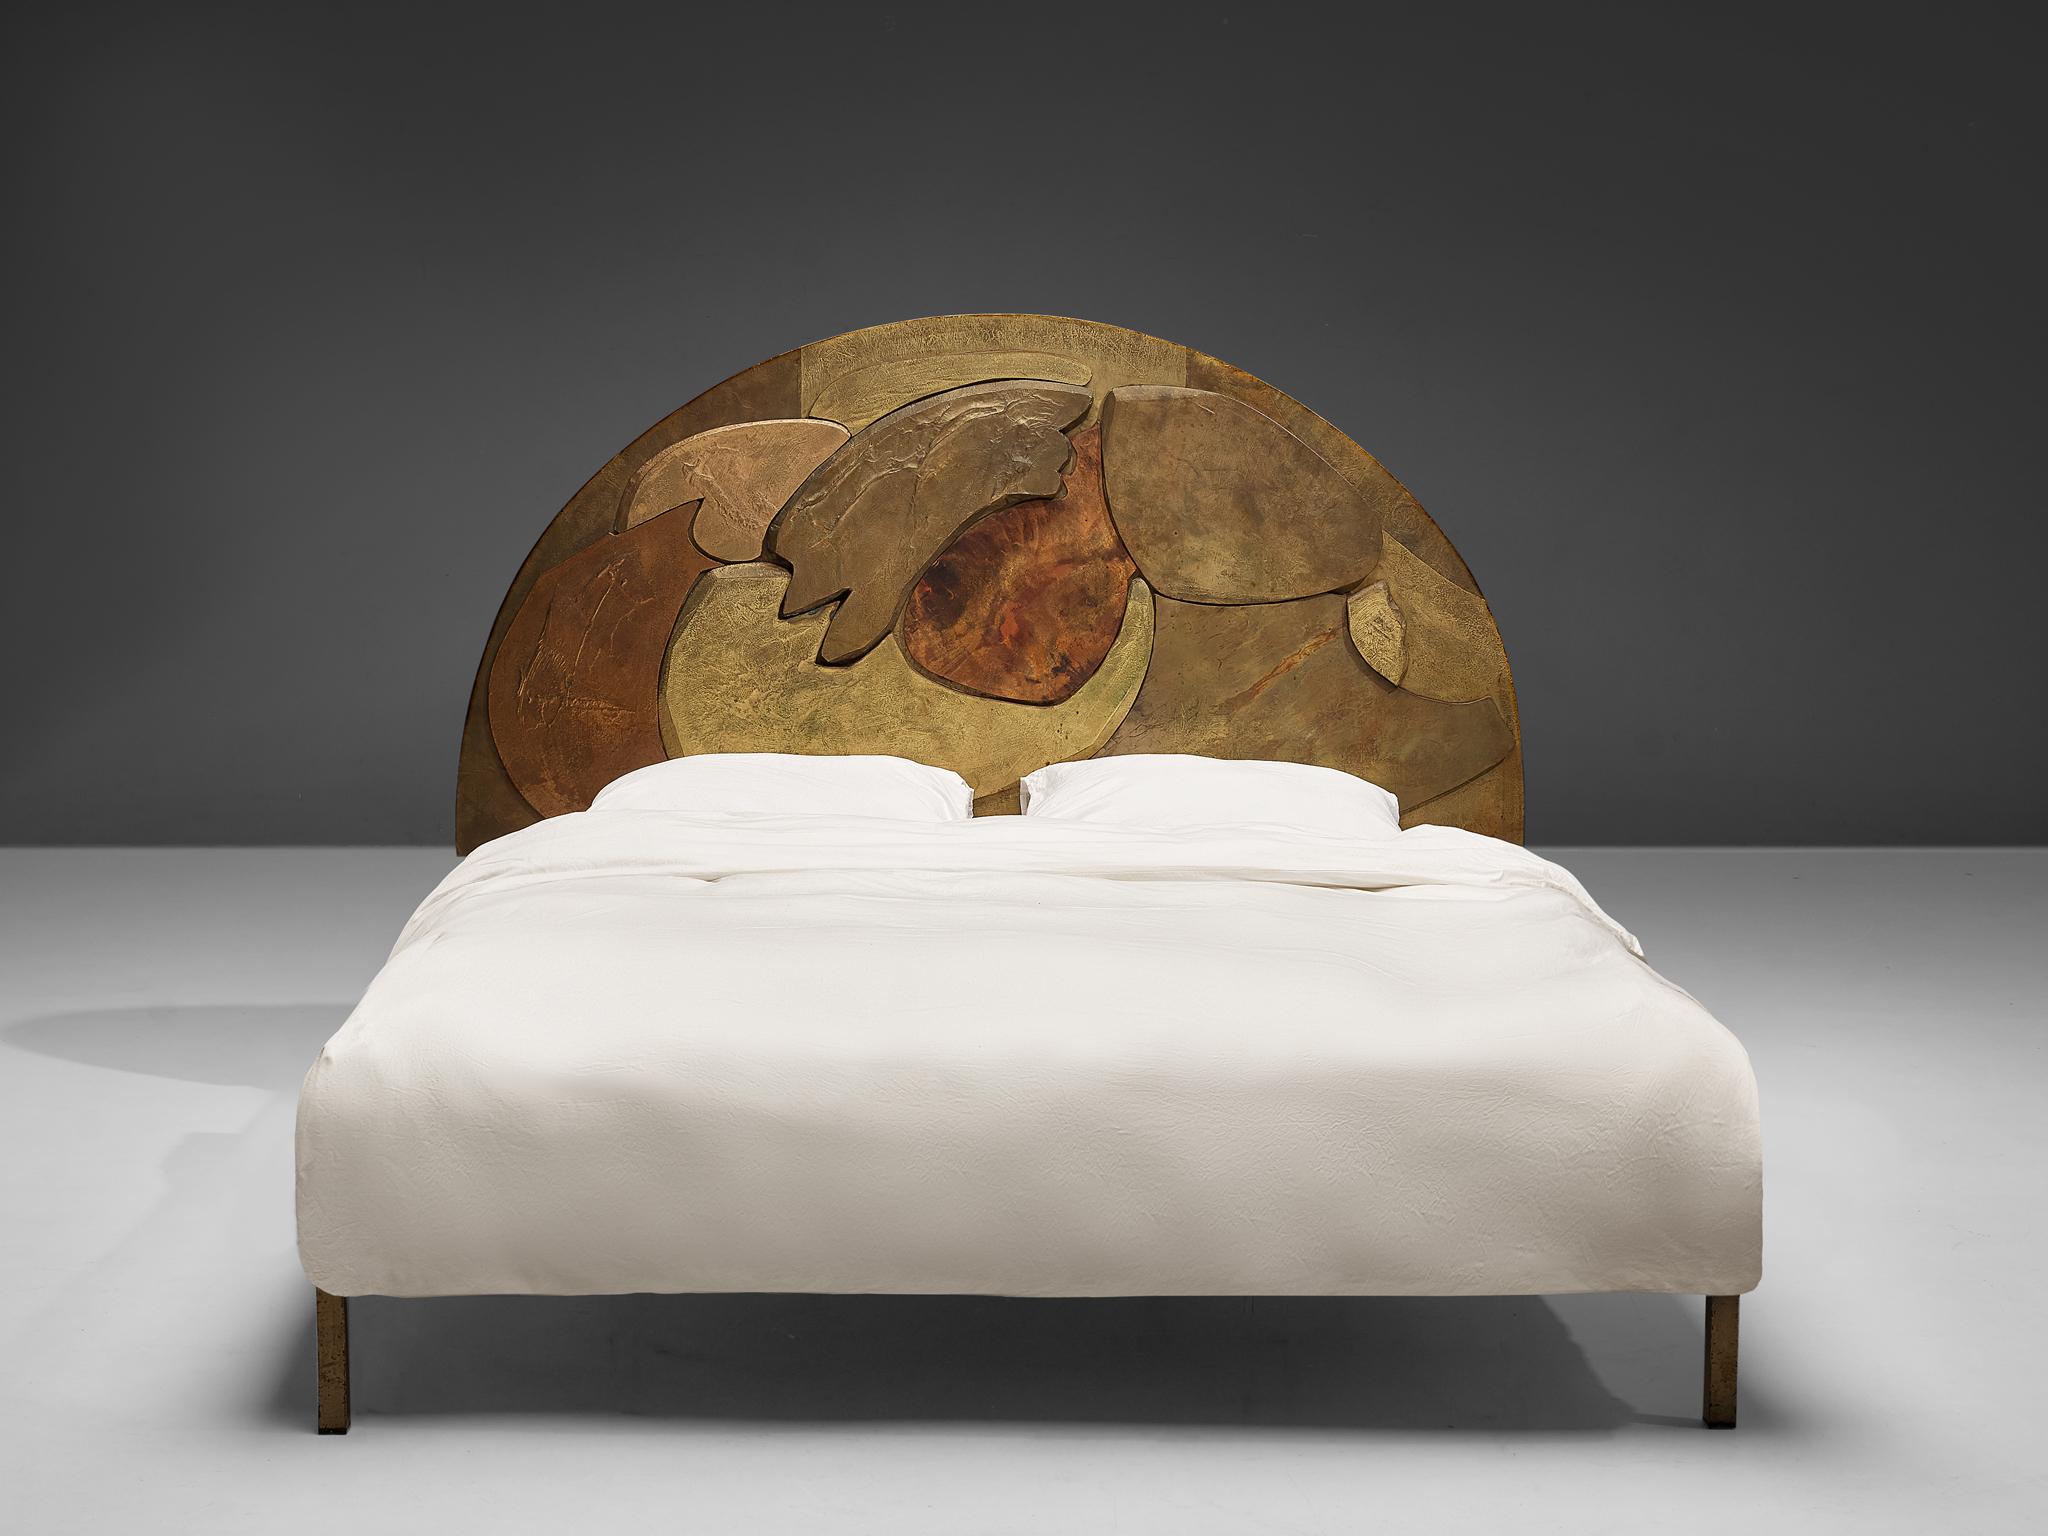 Lorenzo Burchiellaro, headboard, wood, metal, Italy, 1970s

Stunning headboard by Lorenzo Burchiellaro made in the 1970s. Buchiellaro created a truly exquisite headboard with a design composed of different pieces of wood placed next and on top of